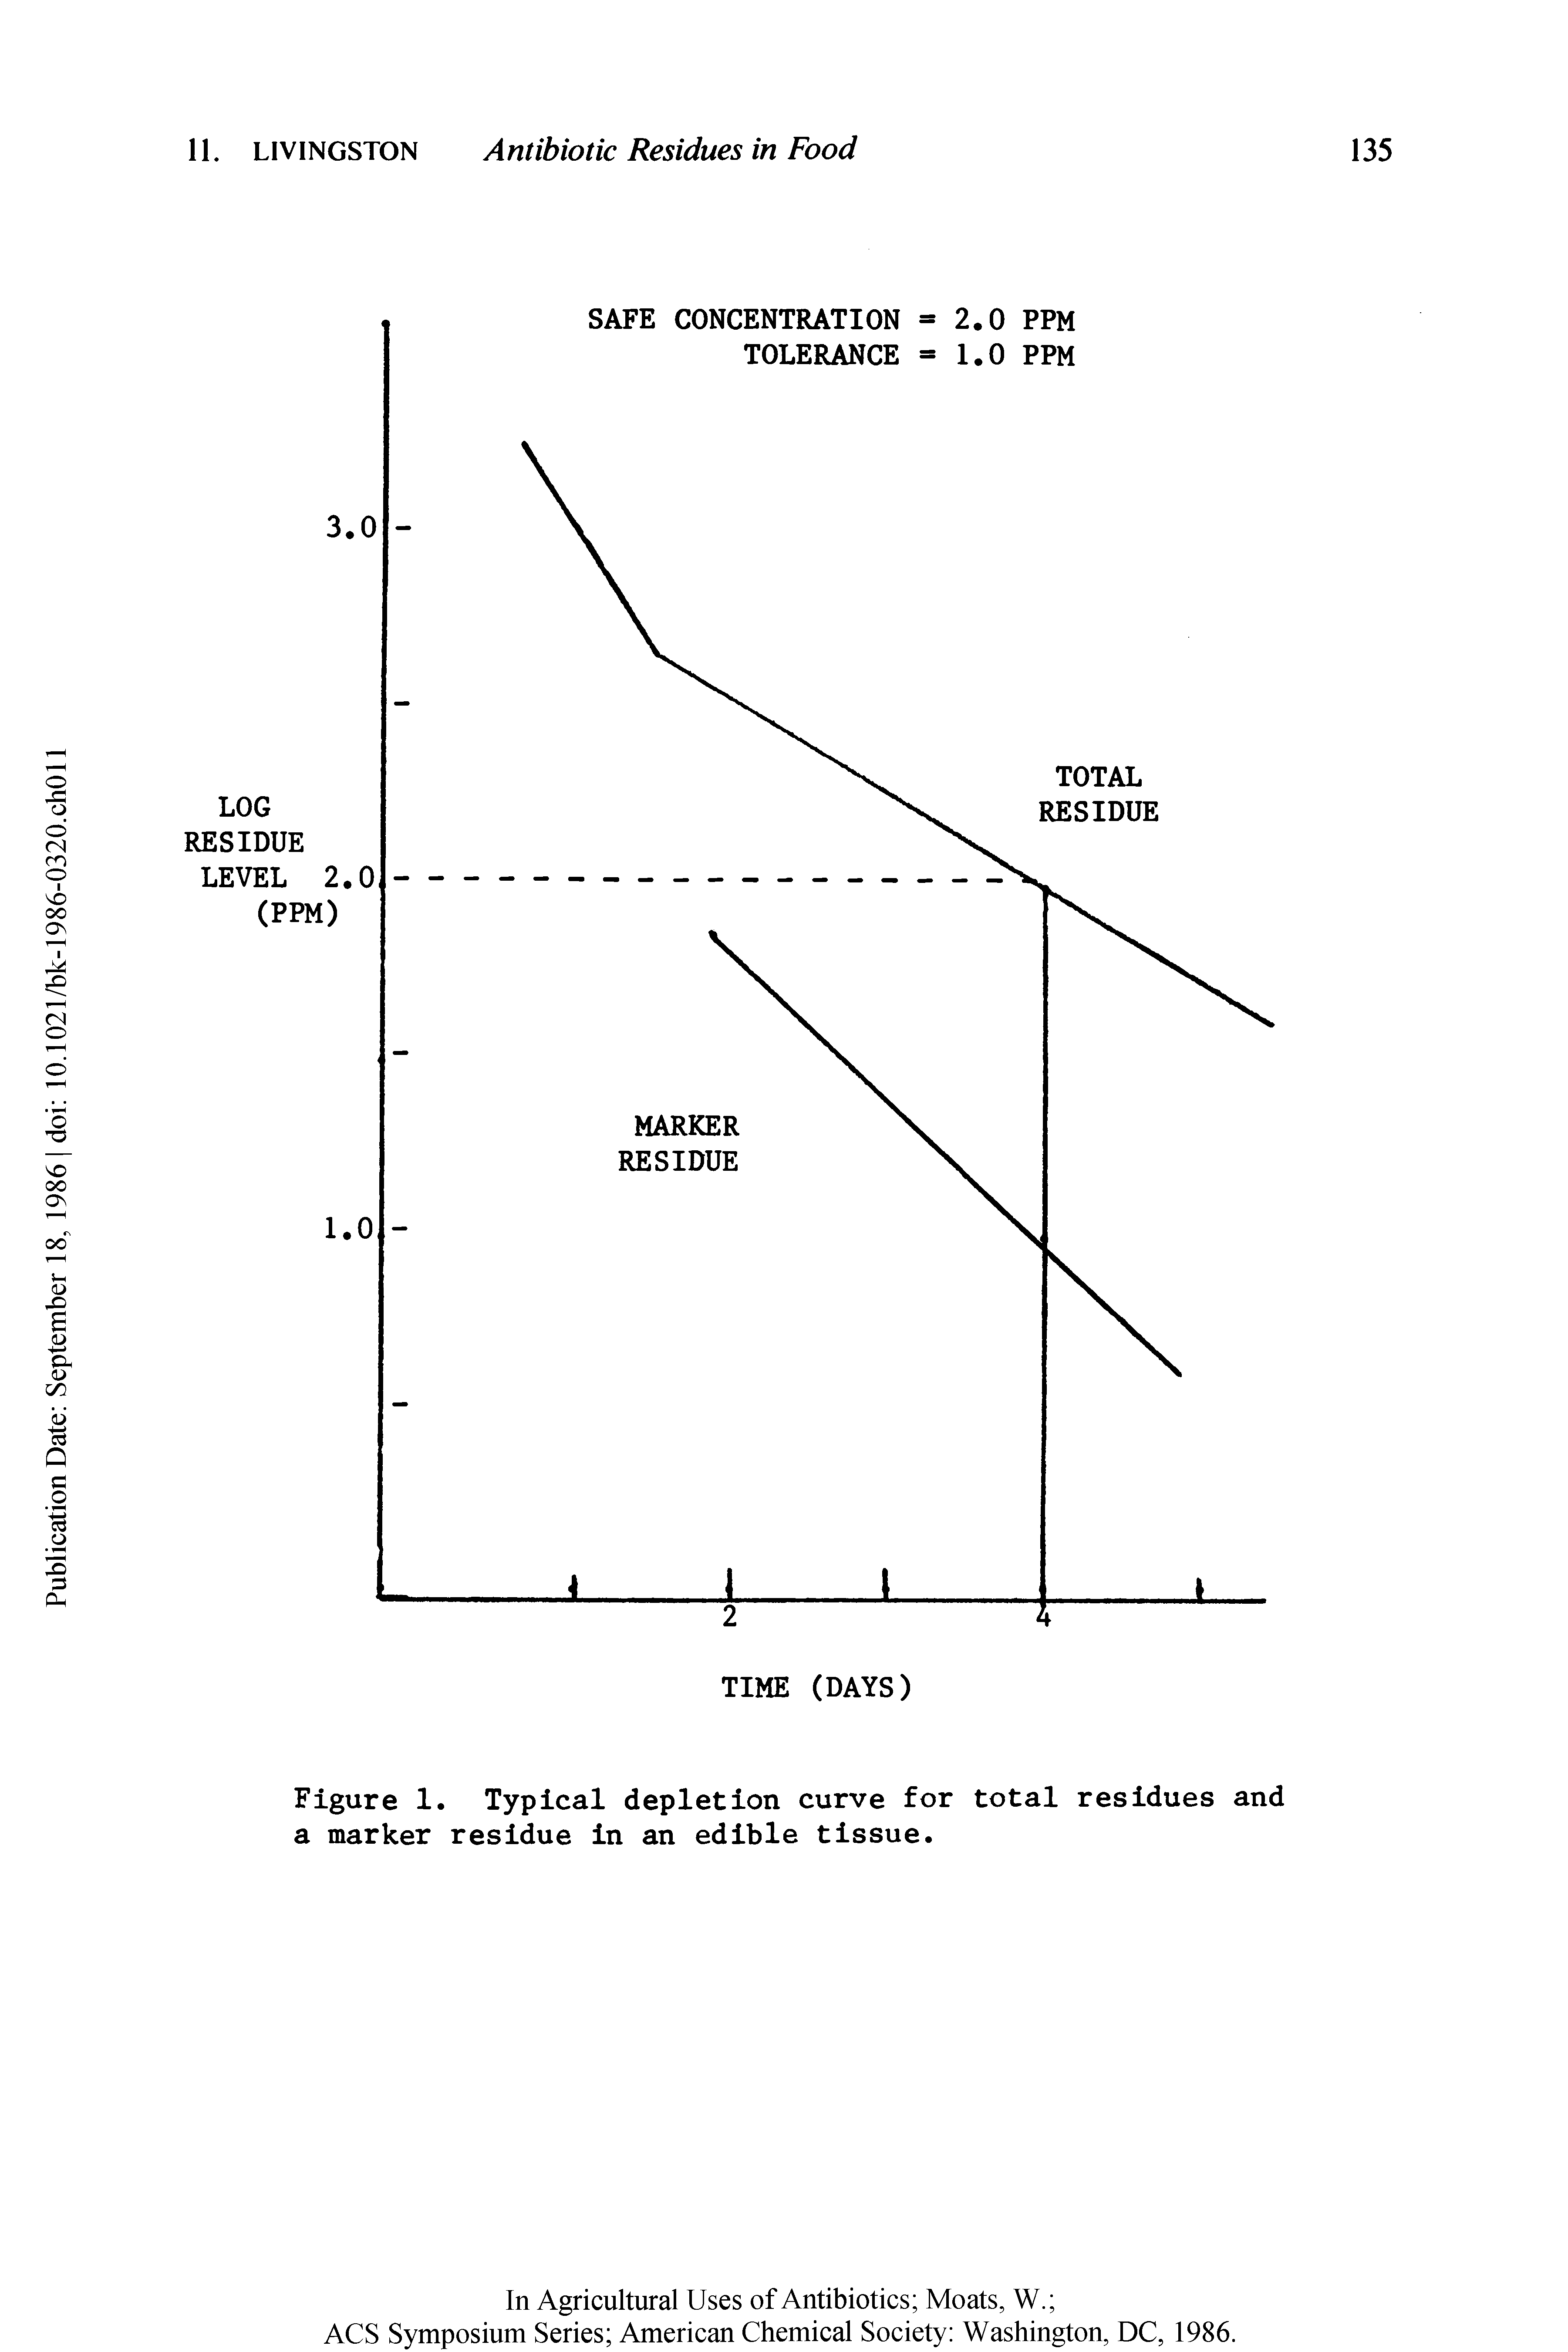 Figure 1. Typical depletion curve for total residues and a marker residue in an edible tissue.